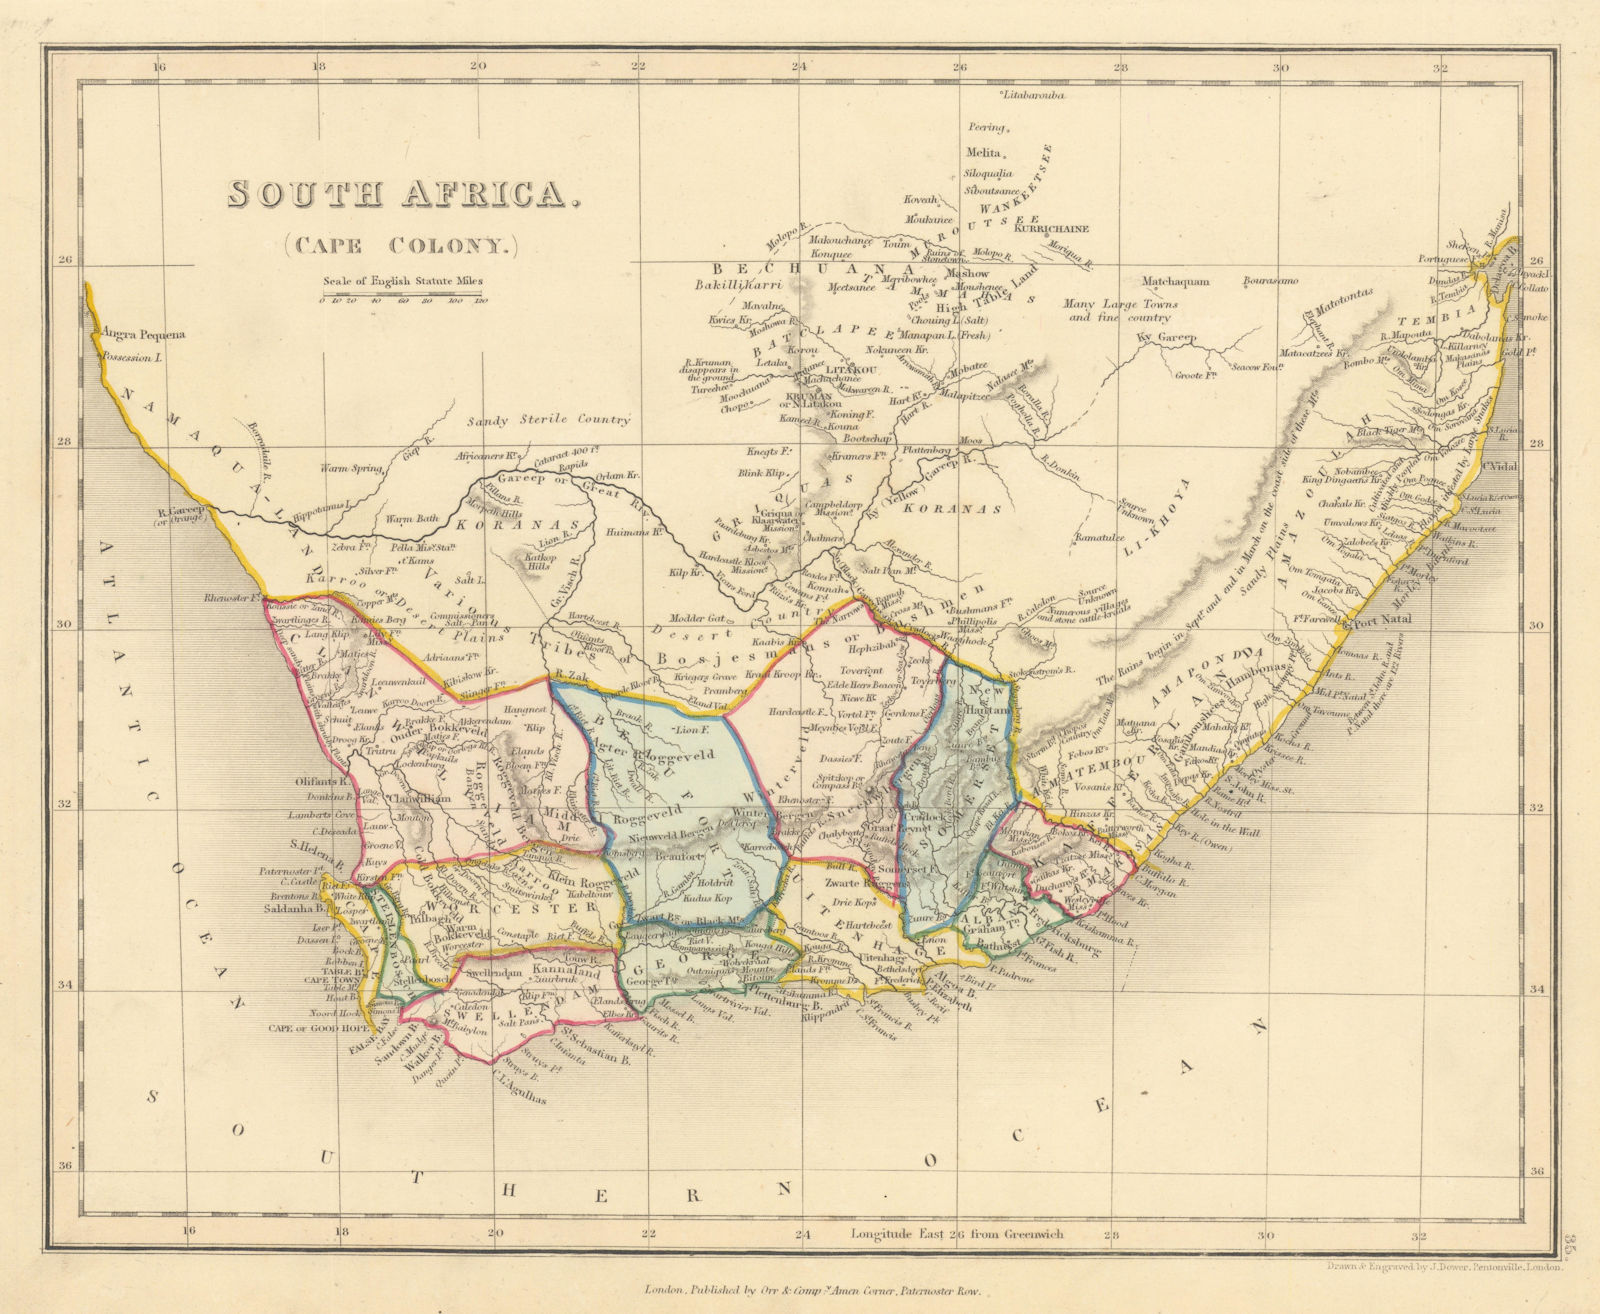 South Africa (Cape Colony) by John Dower. Western Cape regions/counties 1845 map